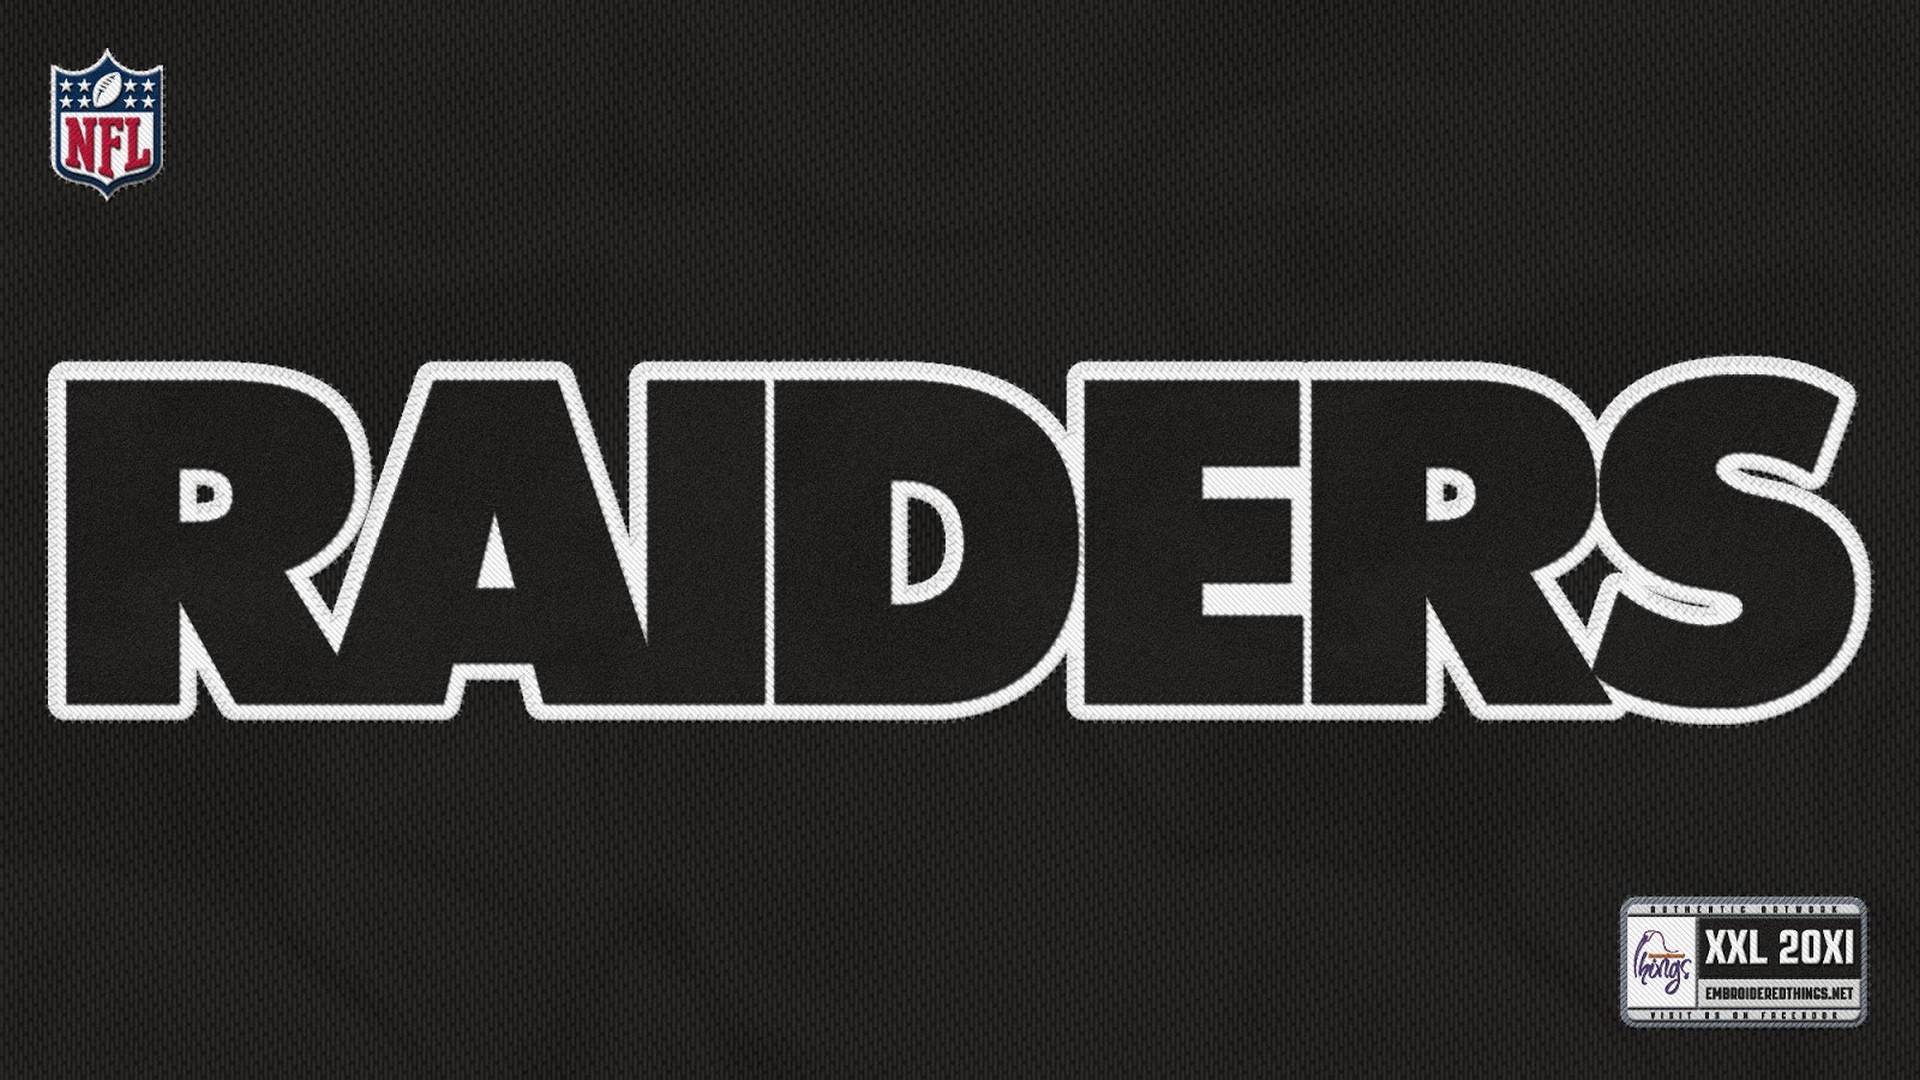 Wallpaper Desktop Oakland Raiders HD with high-resolution 1920x1080 pixel. You can use this wallpaper for your Mac or Windows Desktop Background, iPhone, Android or Tablet and another Smartphone device